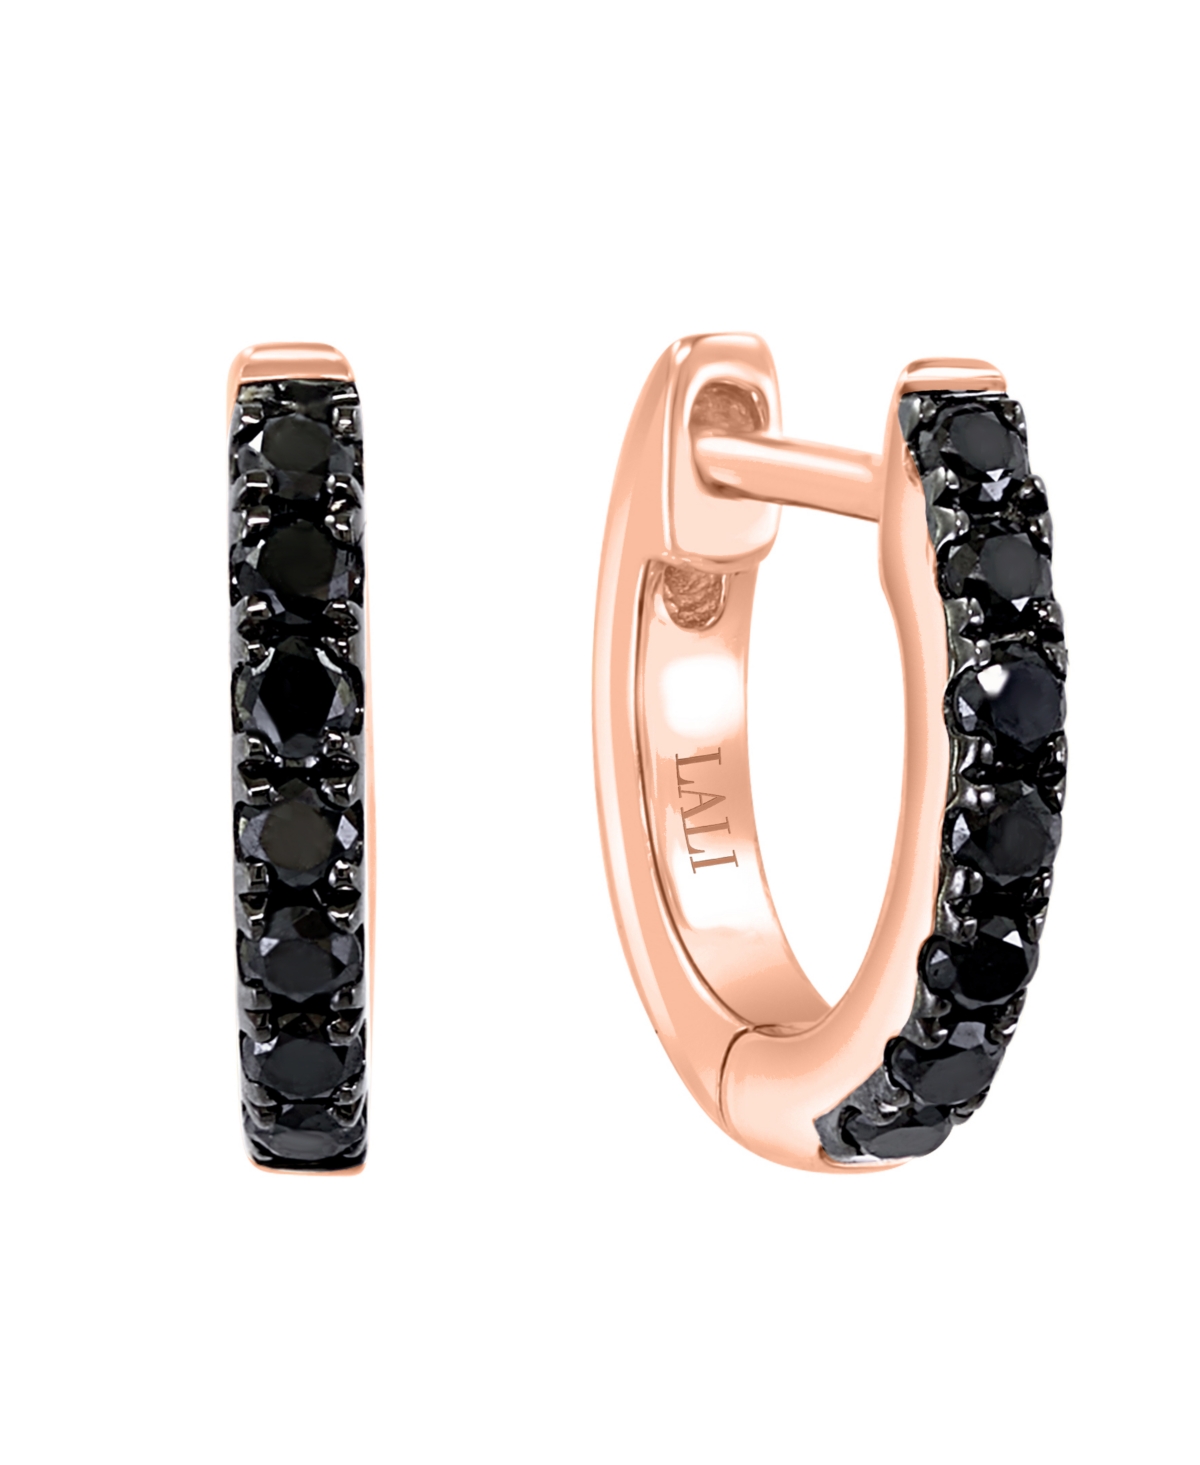 Lali Jewels Black Diamond (1/4 ct. t.w.) Earring in 14K White Gold , 14K Yellow Gold or 14K Rose Gold